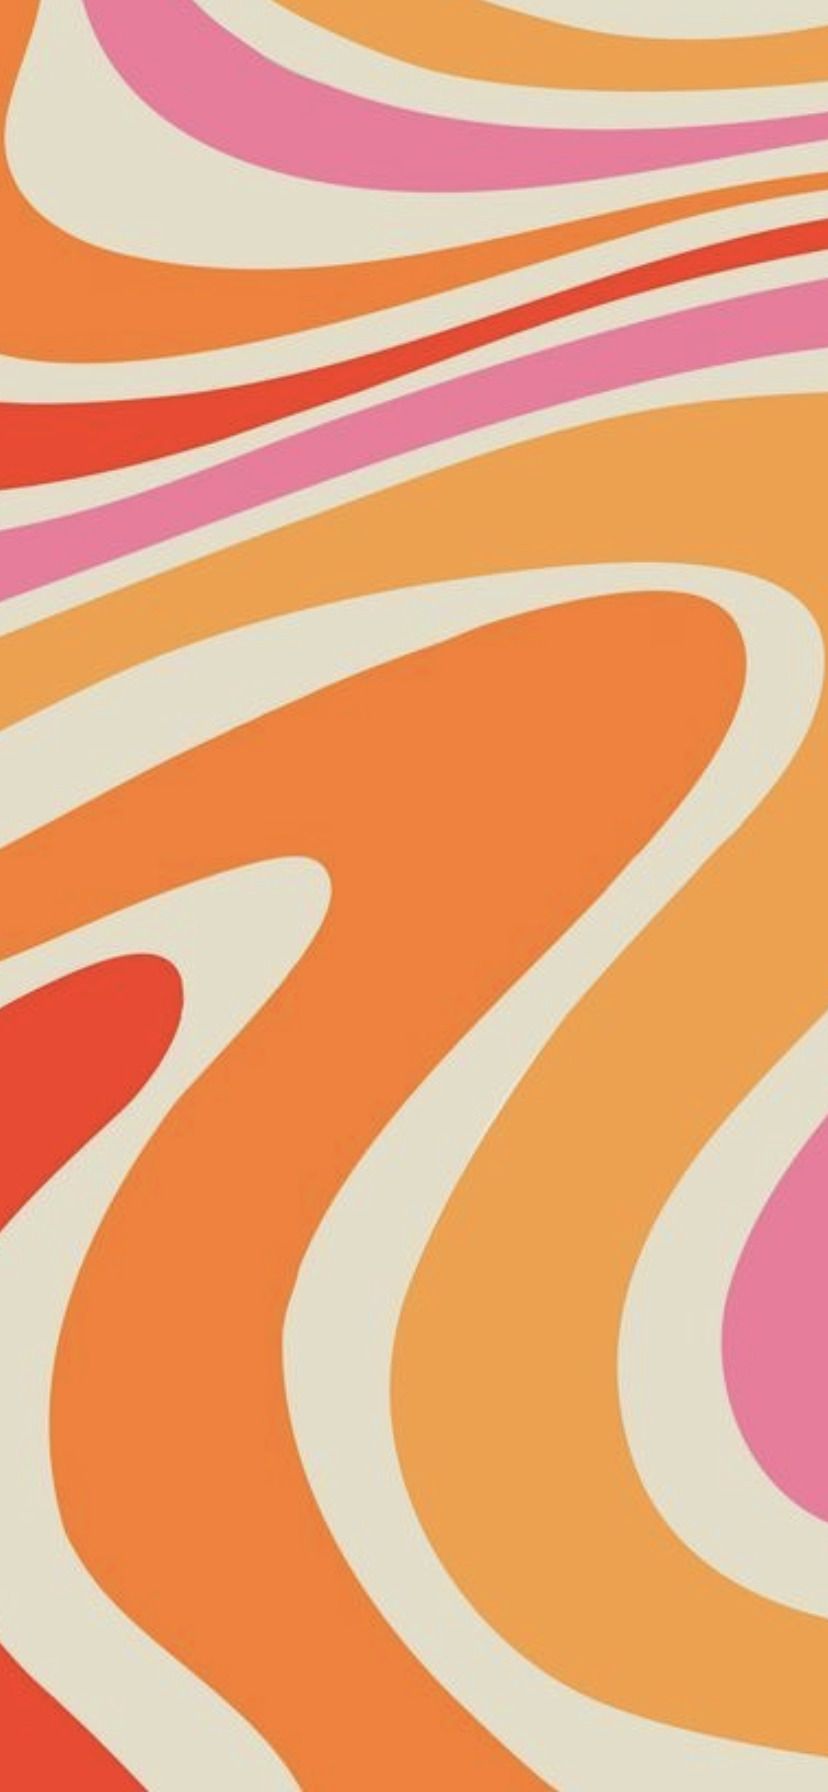 Aesthetic iPhone wallpaper with a wavy pattern - Orange